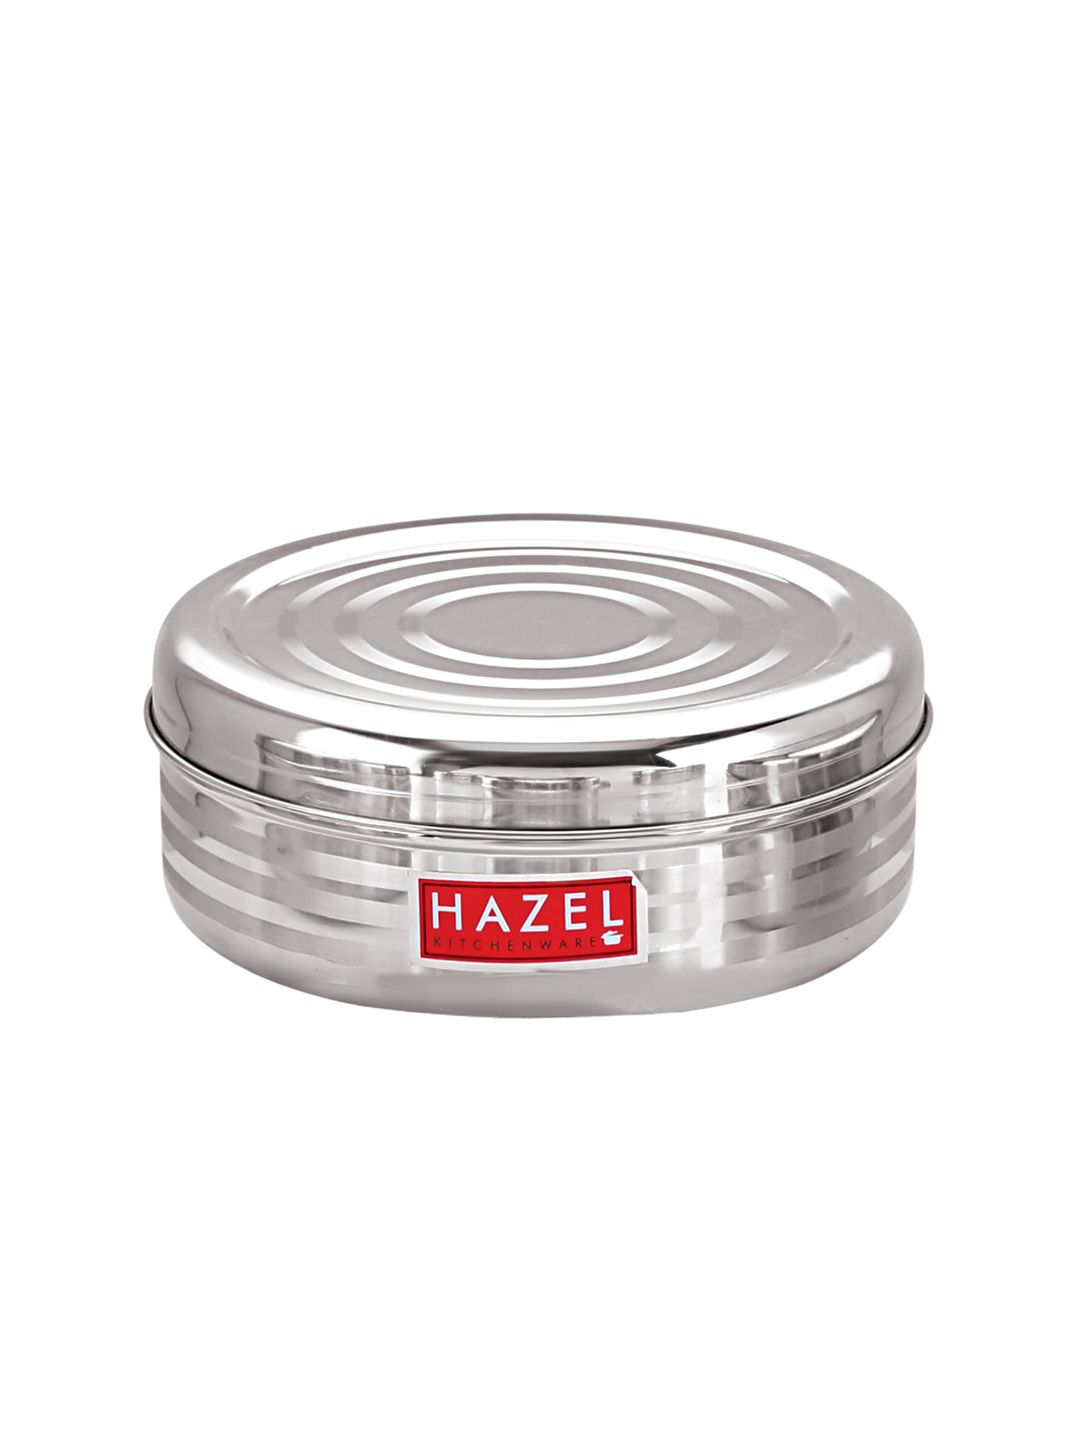 HAZEL Silver-Toned Stainless Steel Storage Container Price in India